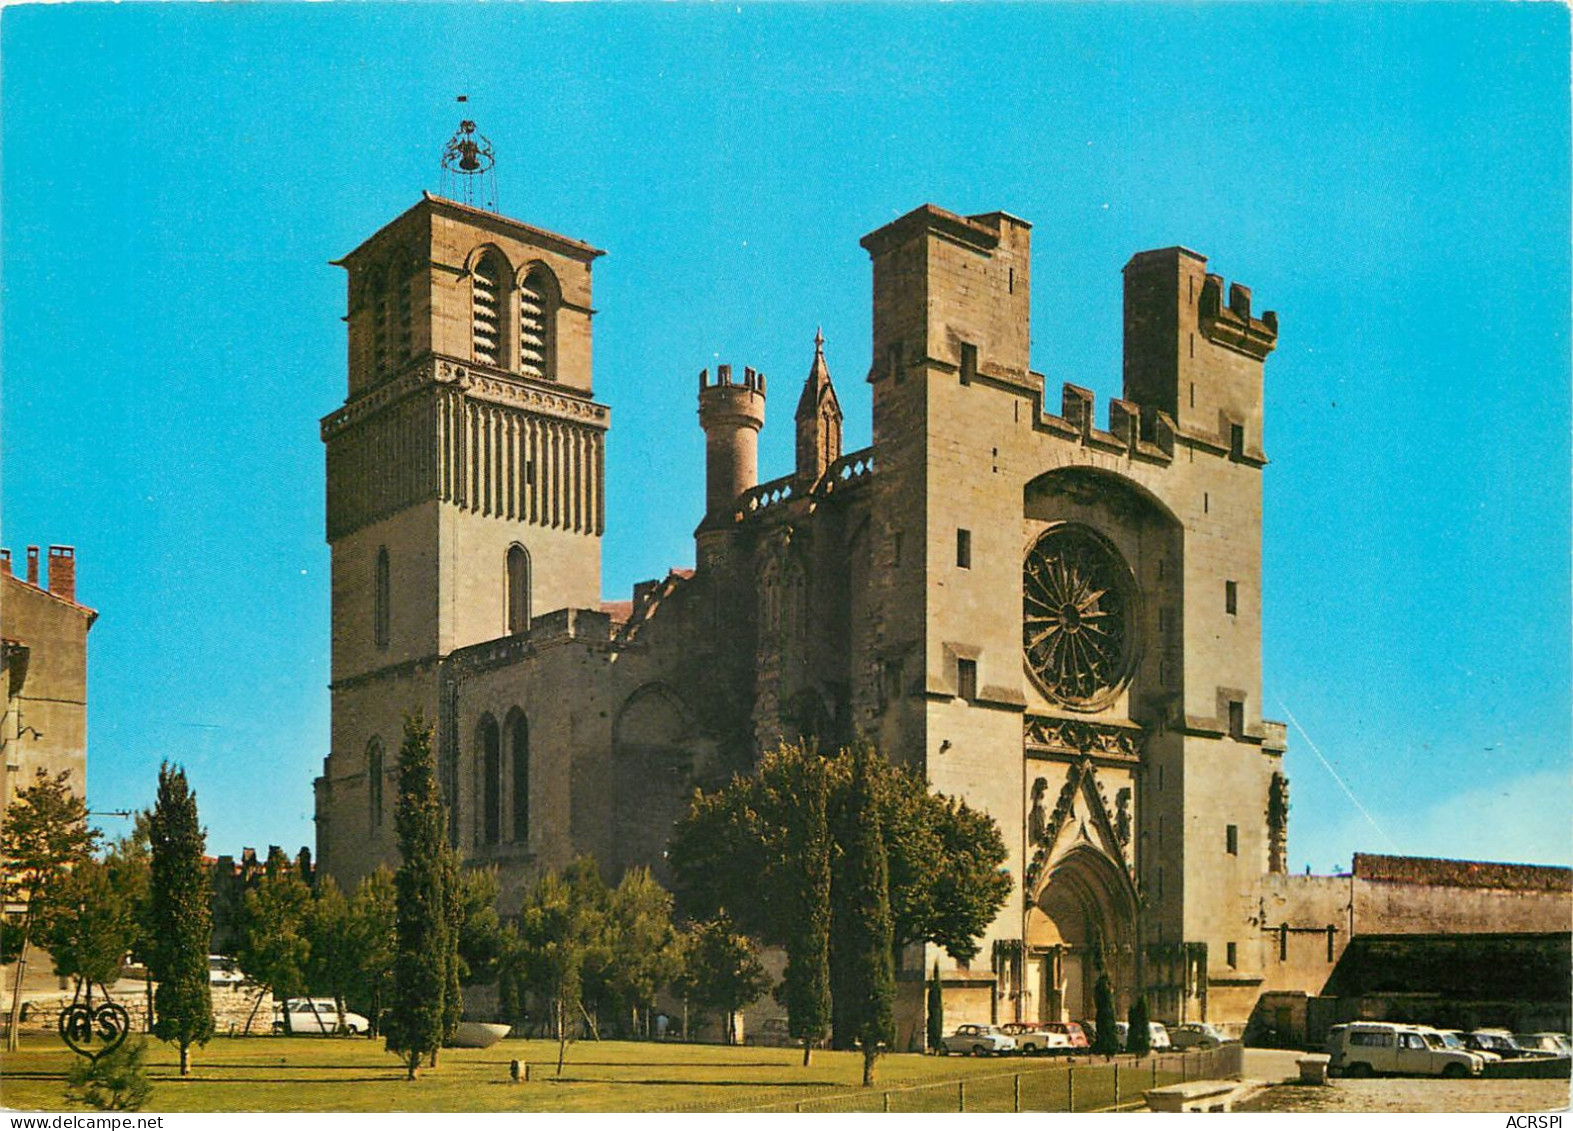 BEZIERS Cathedrale Saint Nazaire 21(scan Recto-verso) MC2485 - Beziers